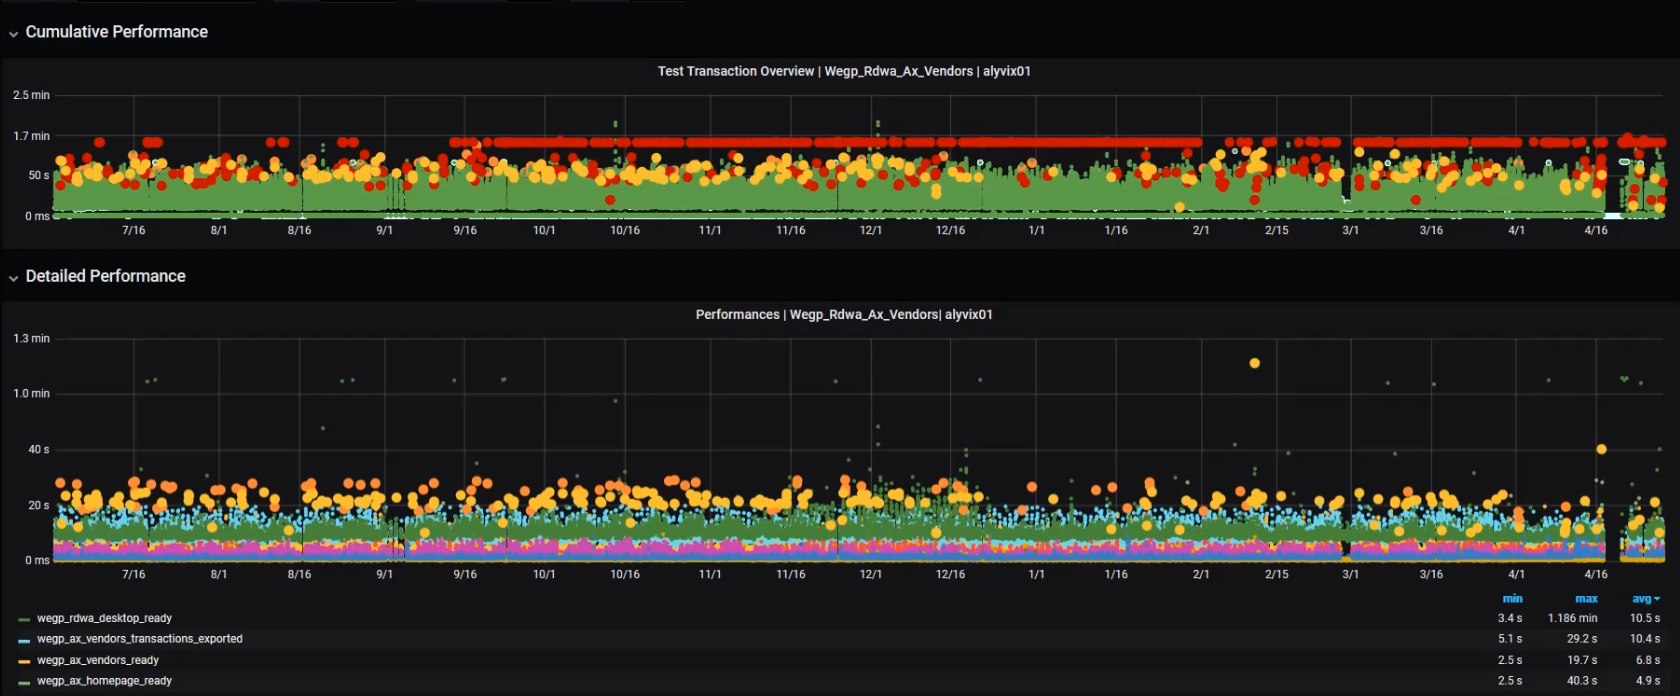 Grafana screen showing a mid-level zoom into that data